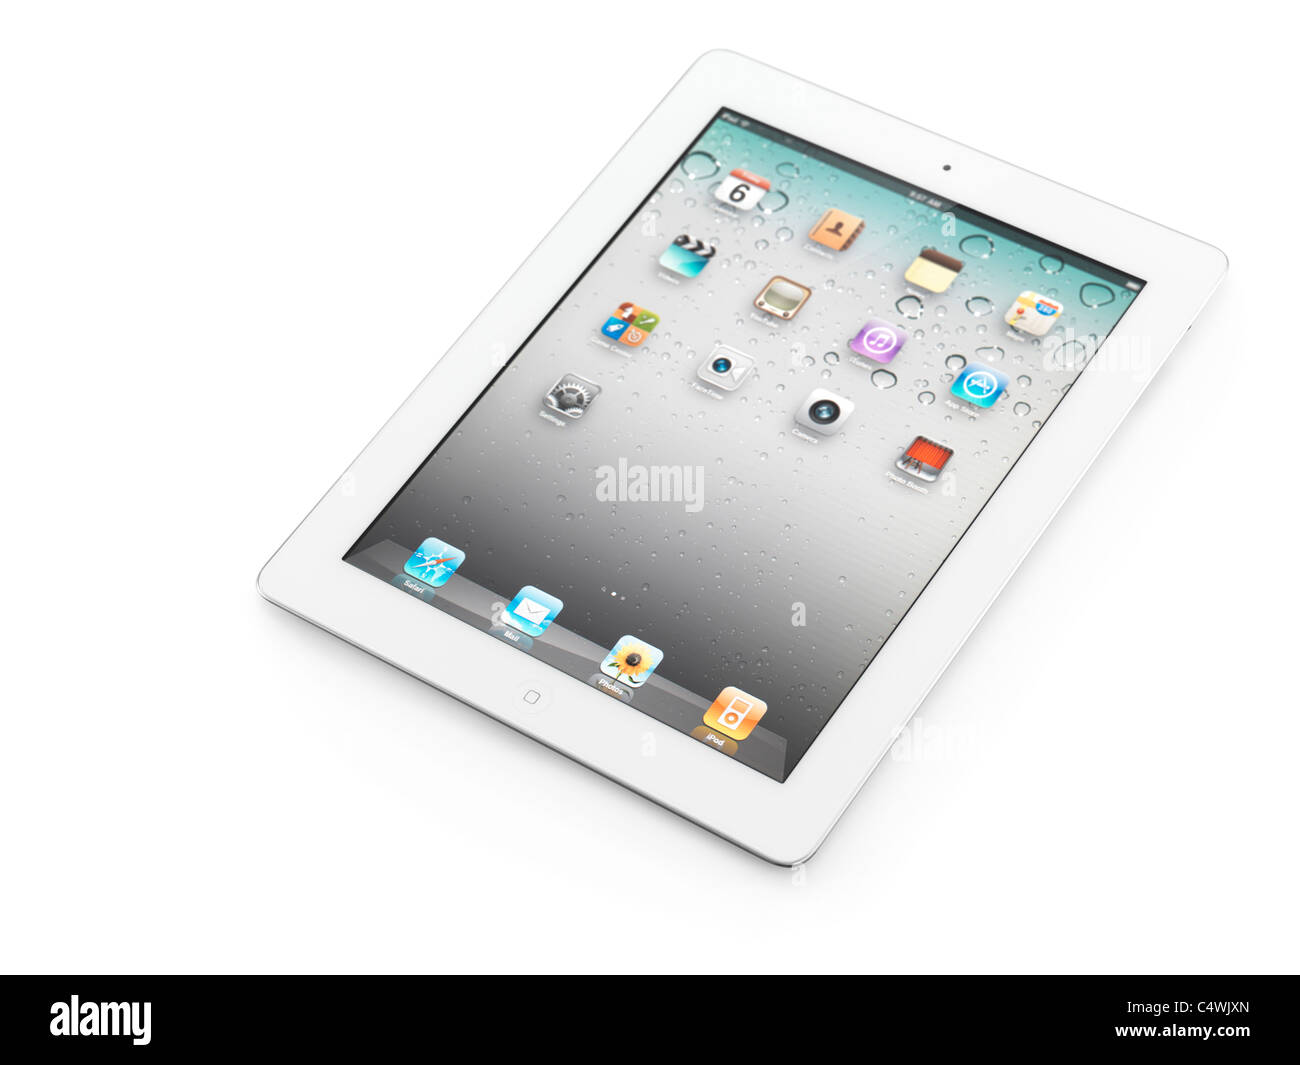 White Apple iPad 2 tablet computer with desktop icons on its display. Isolated with clipping path on white background. Stock Photo